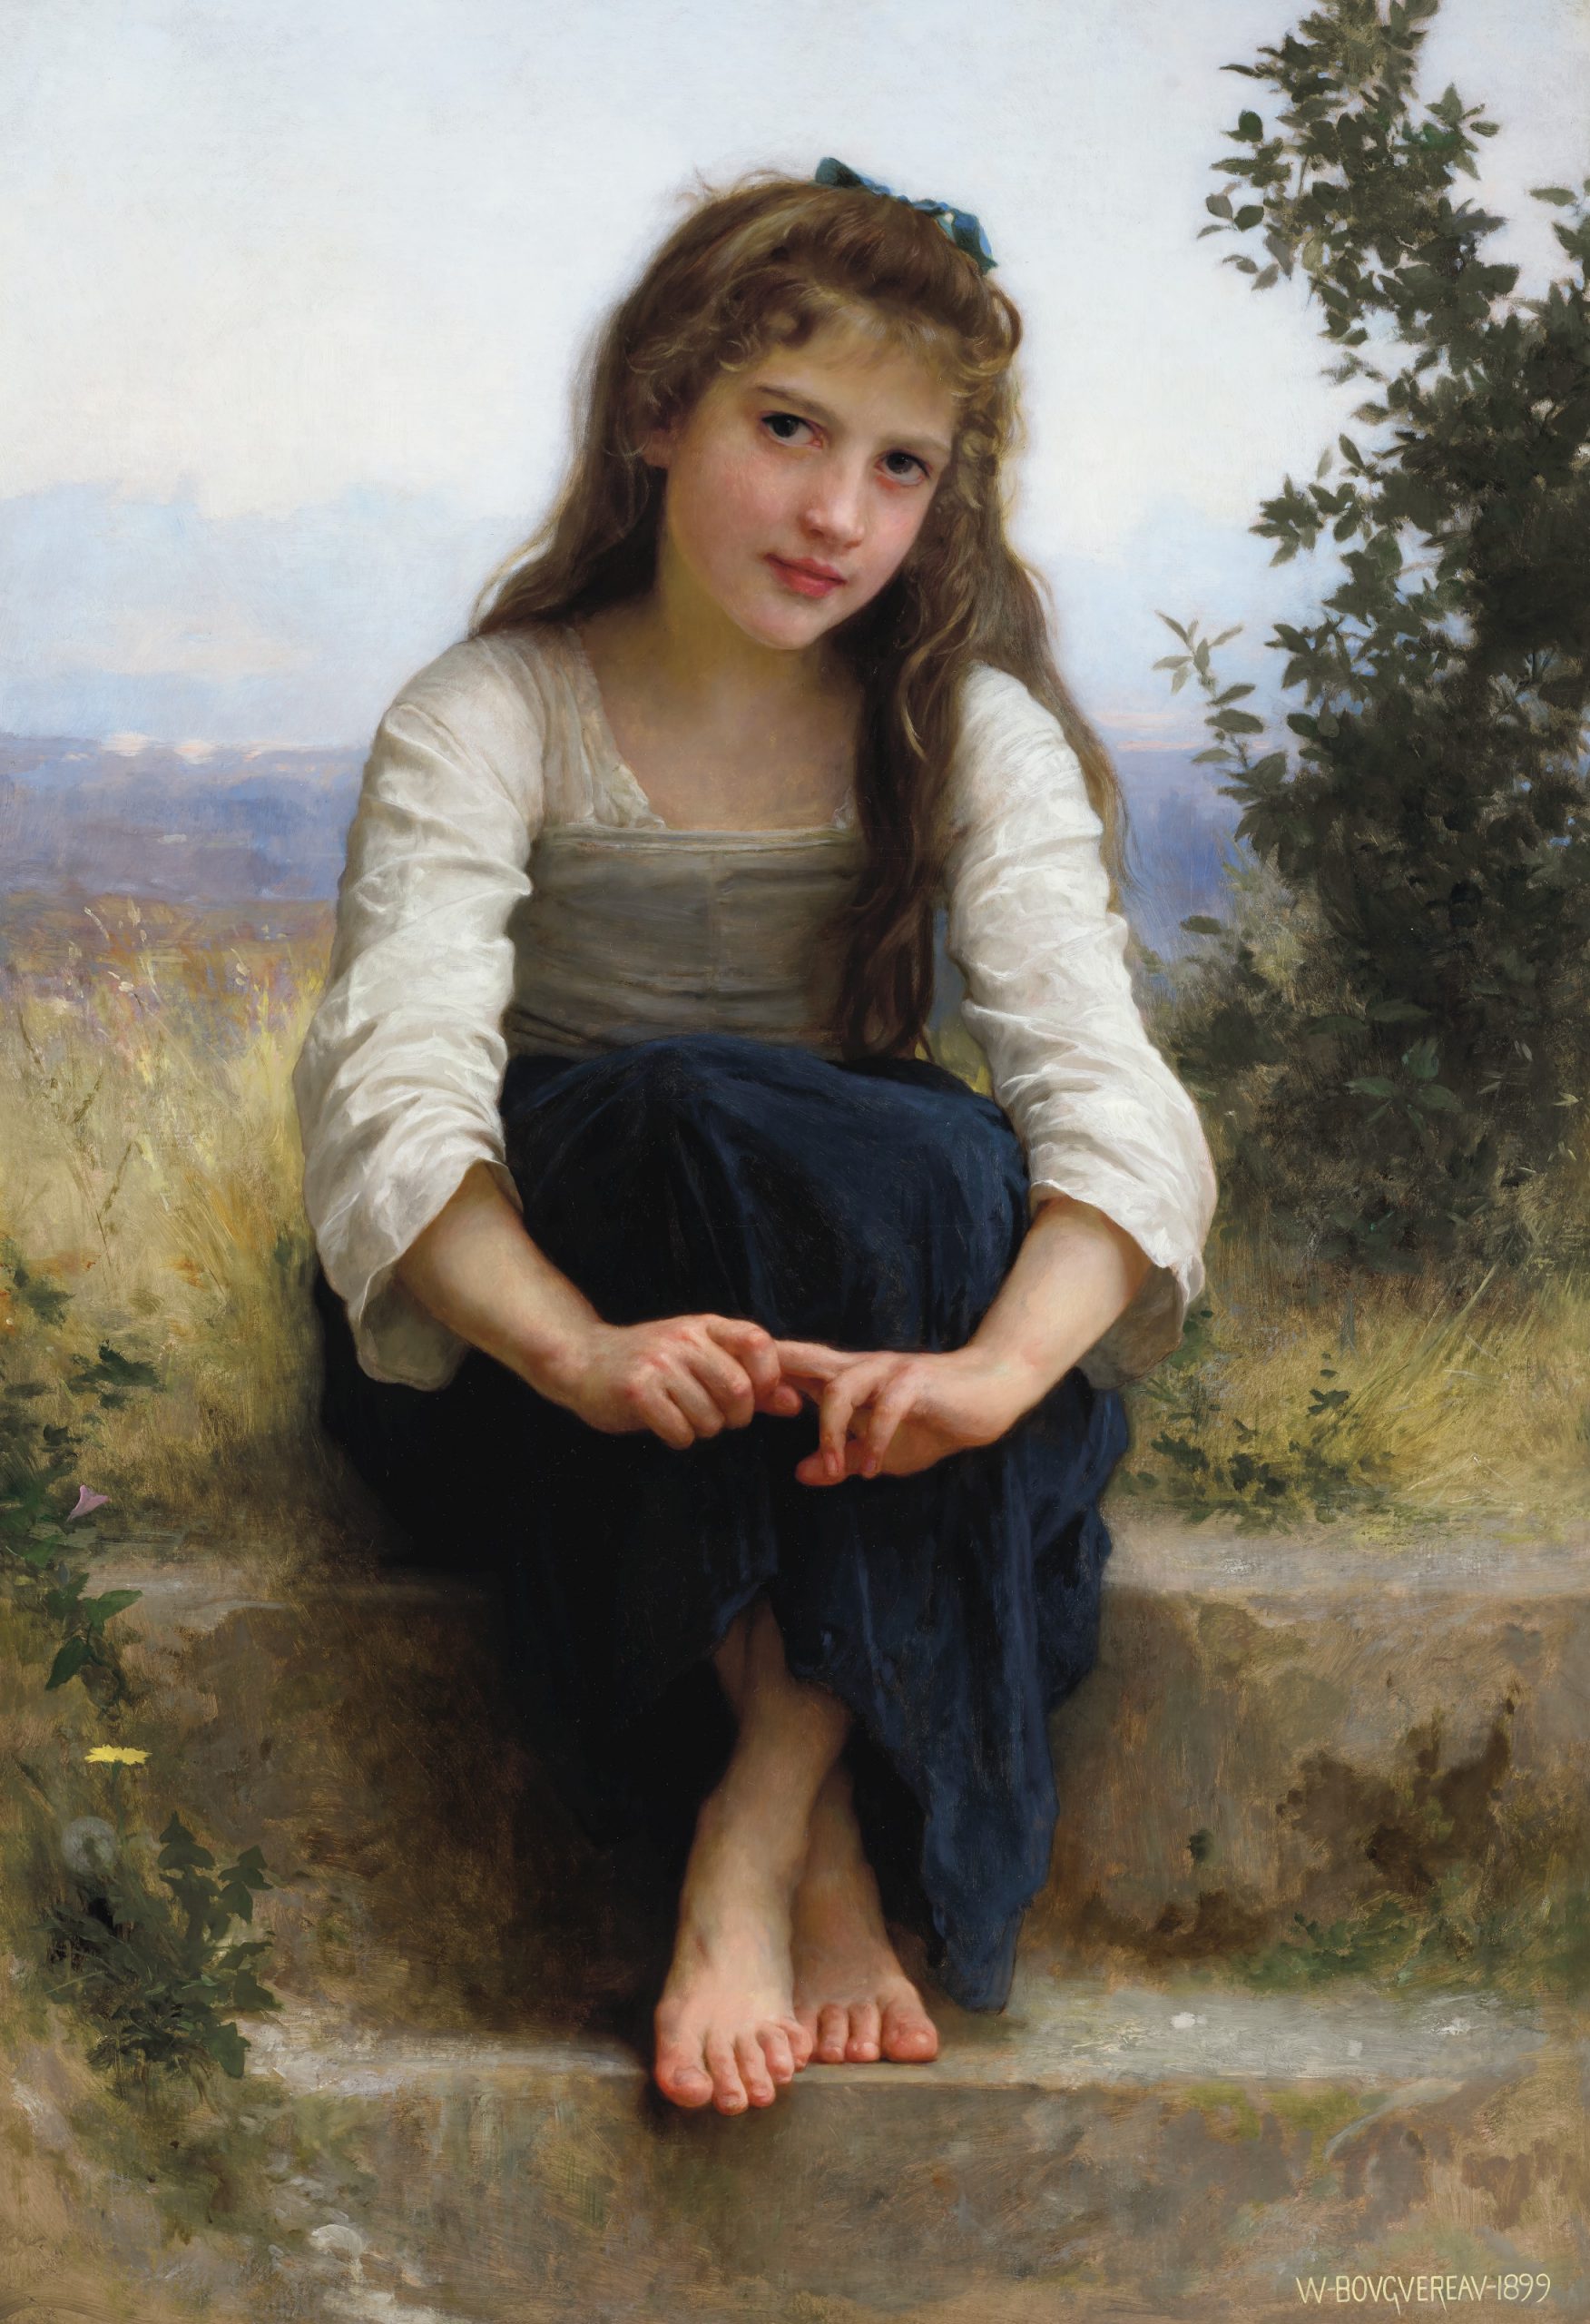 William Adolphe Bouguereau (French, 1825-1905) Rêverie signed and dated 'W-BOVGVEREAV-1899' (lower right) oil on canvas 43 ¾ x 30 1:8 in. (111.1 x 76.5 cm.) - © CHRISTIE'S 2020